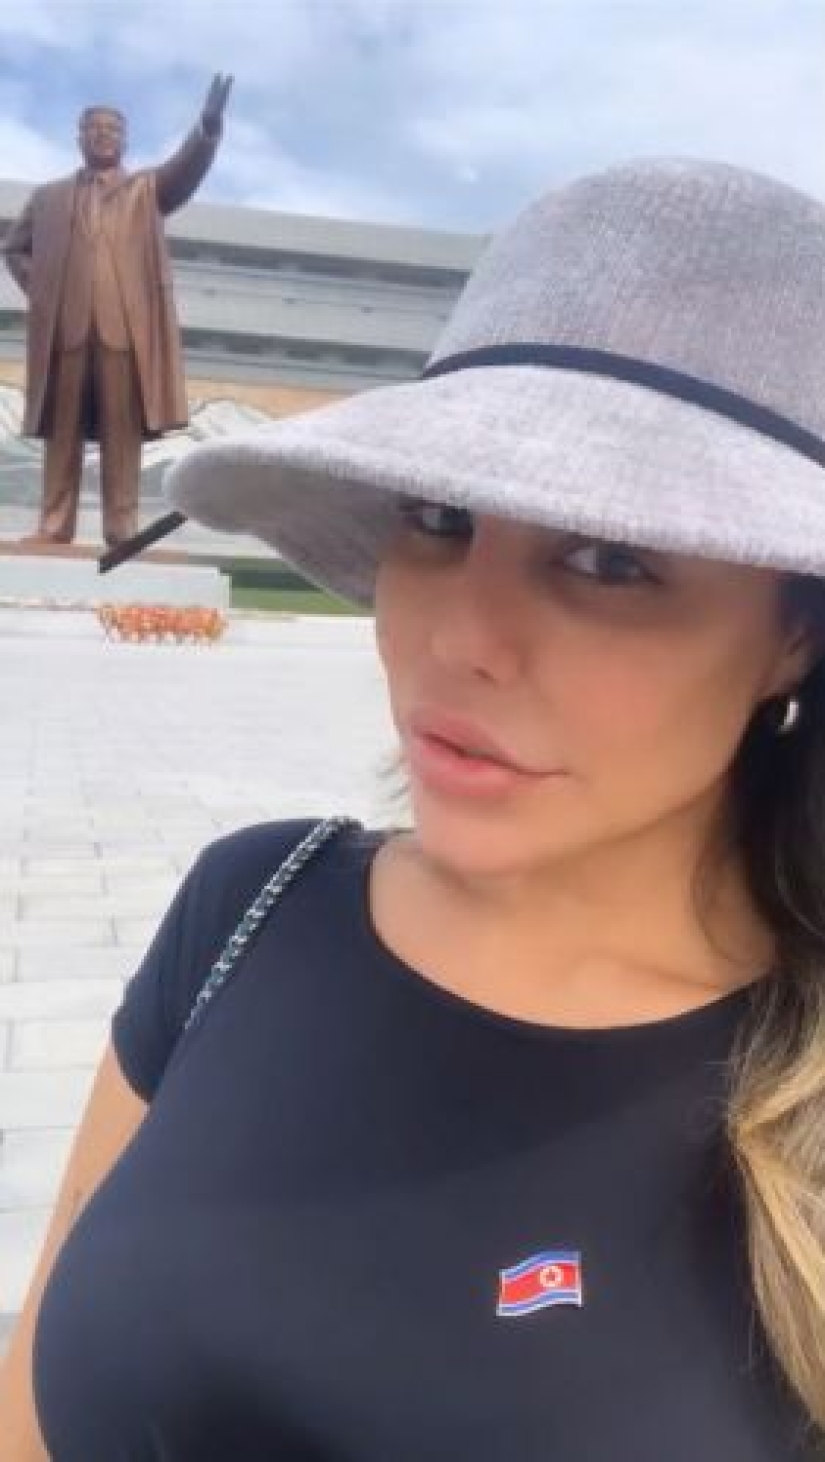 TP and juche: Brazilian model almost went to jail in North Korea because of a passion for selfies